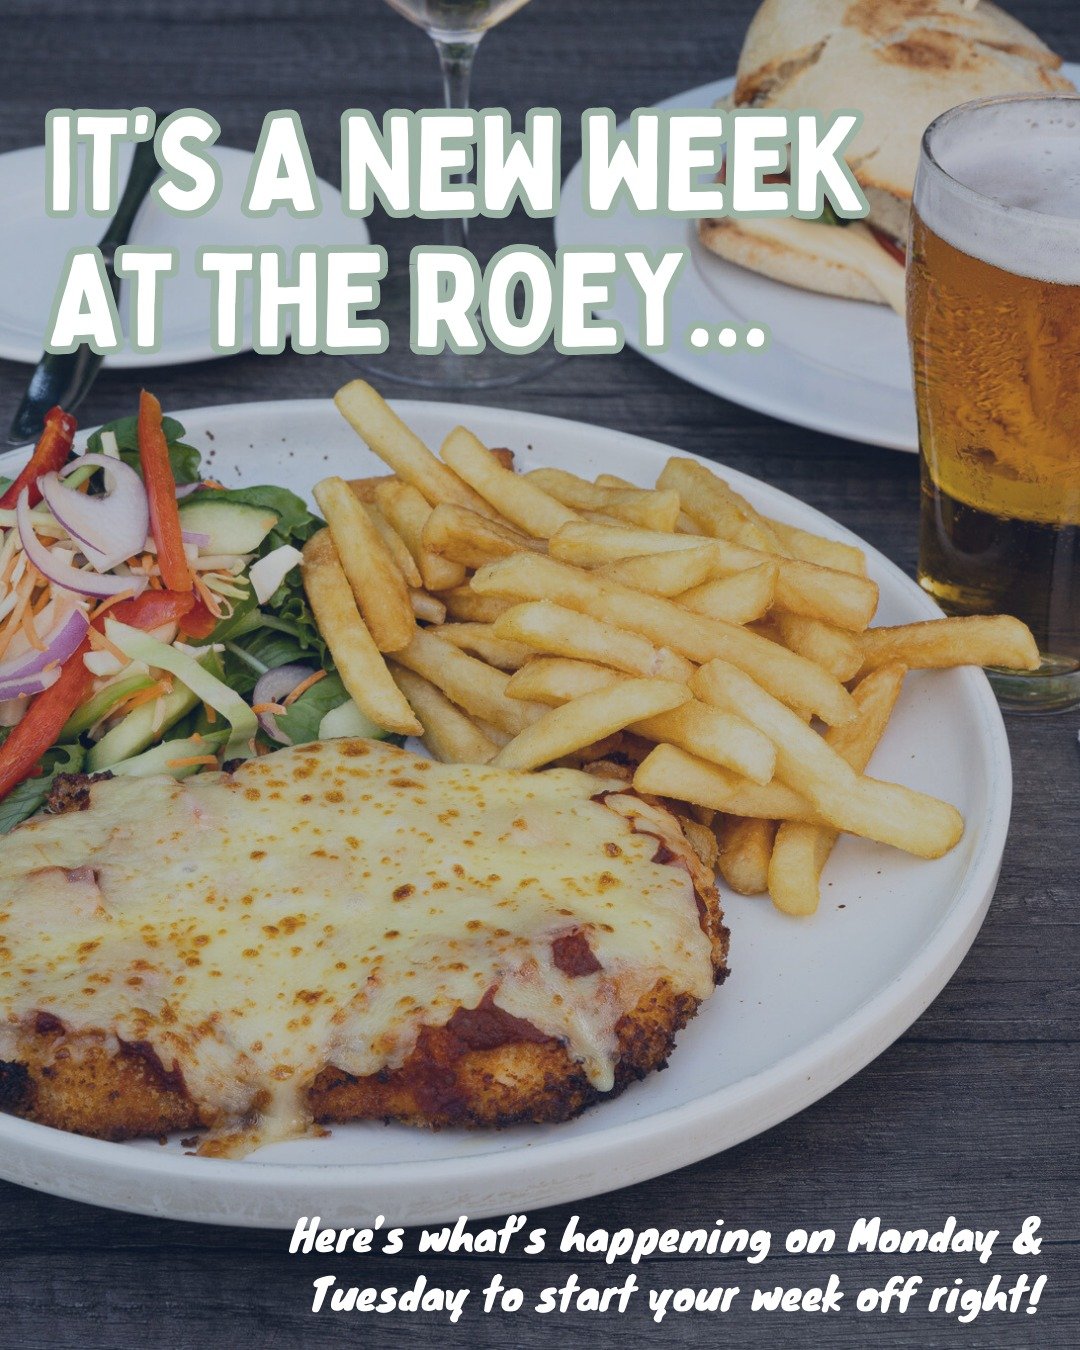 It's a new week! Here's what's happening at The Roey on Monday &amp; Tuesday to get your week started the right way 👇🏽😎

MON 👉🏽 cure that Mondayitis with PARMI NIGHT! Score a famous HUGE Roey Parmi with chips &amp; salad for just $28!

TUES 👉🏽